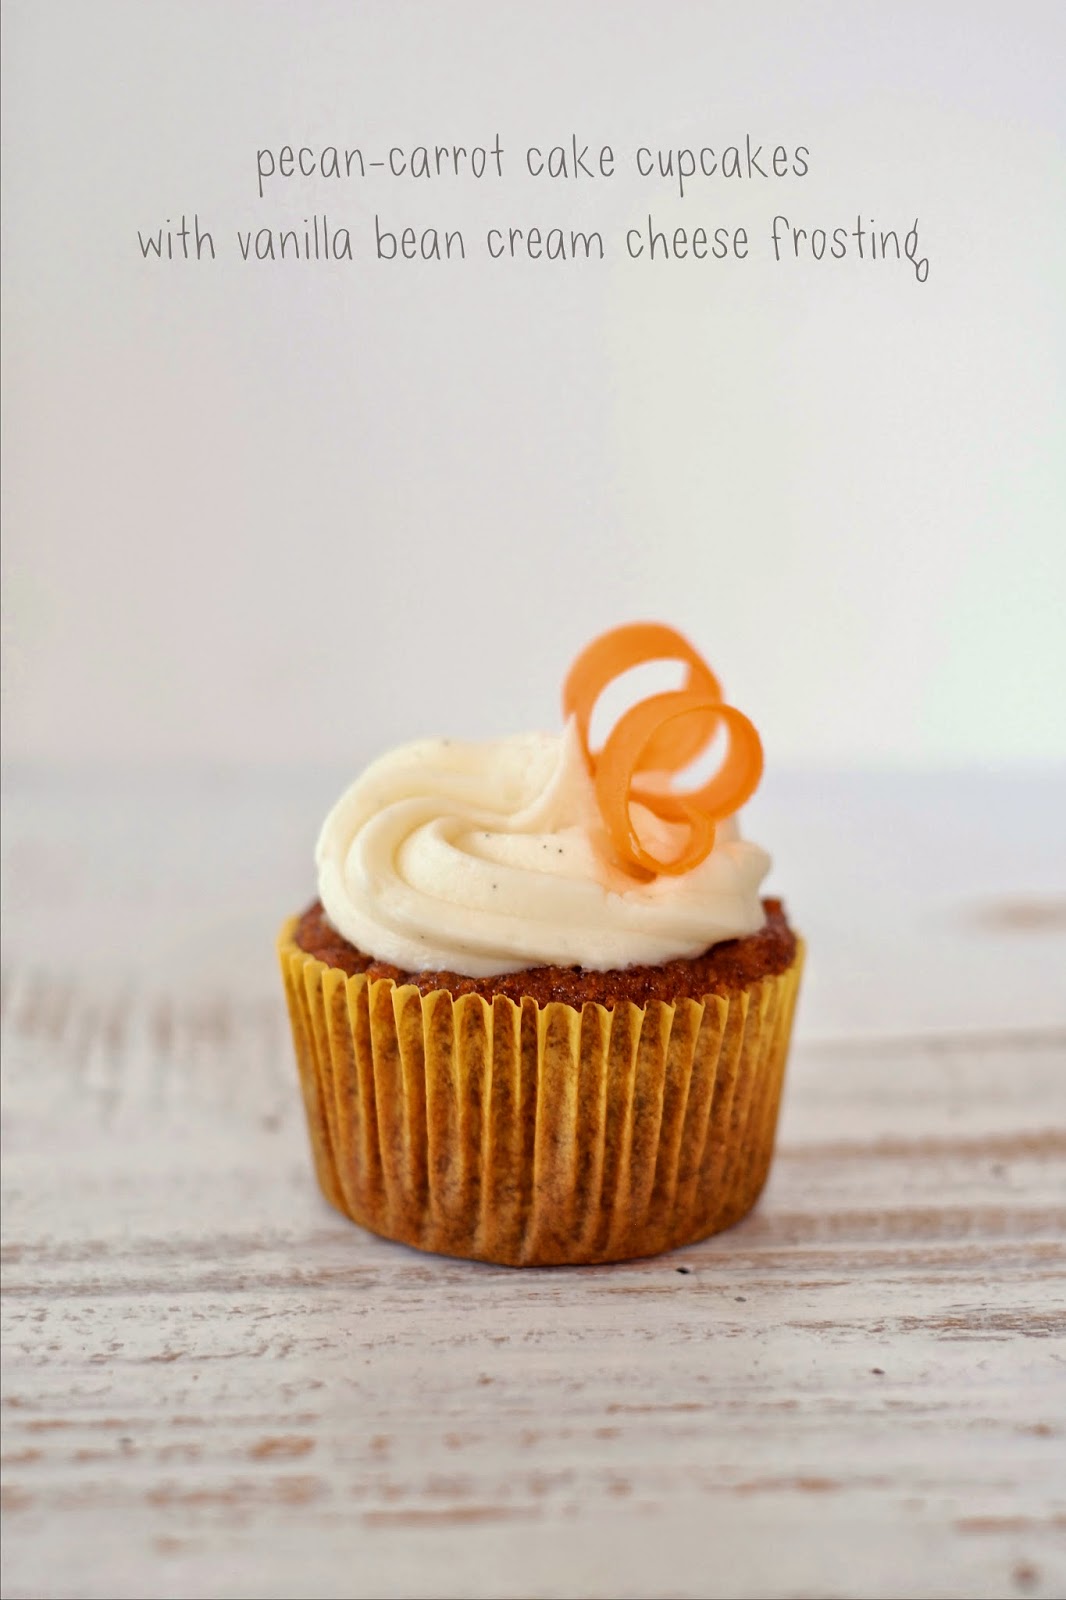 pecan-carrot cake cupcakes with vanilla bean cream cheese frosting